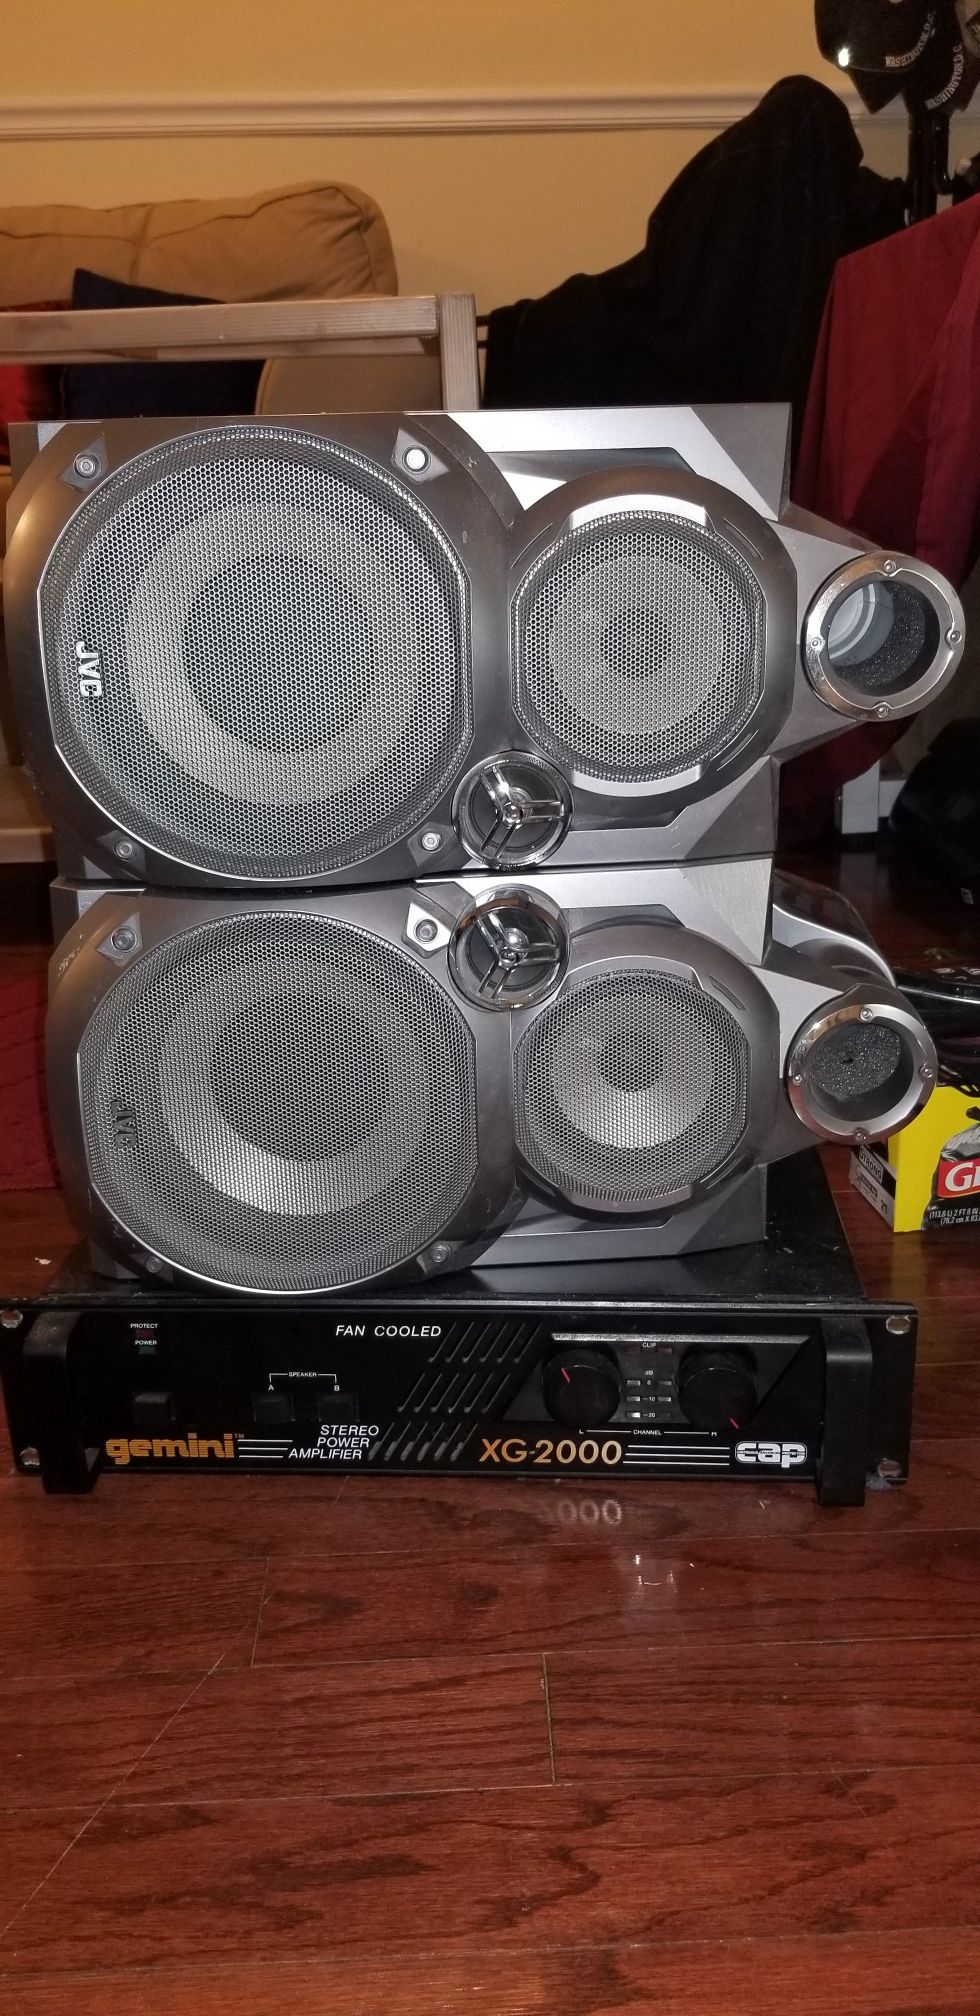 Amplifier and 2 speakers